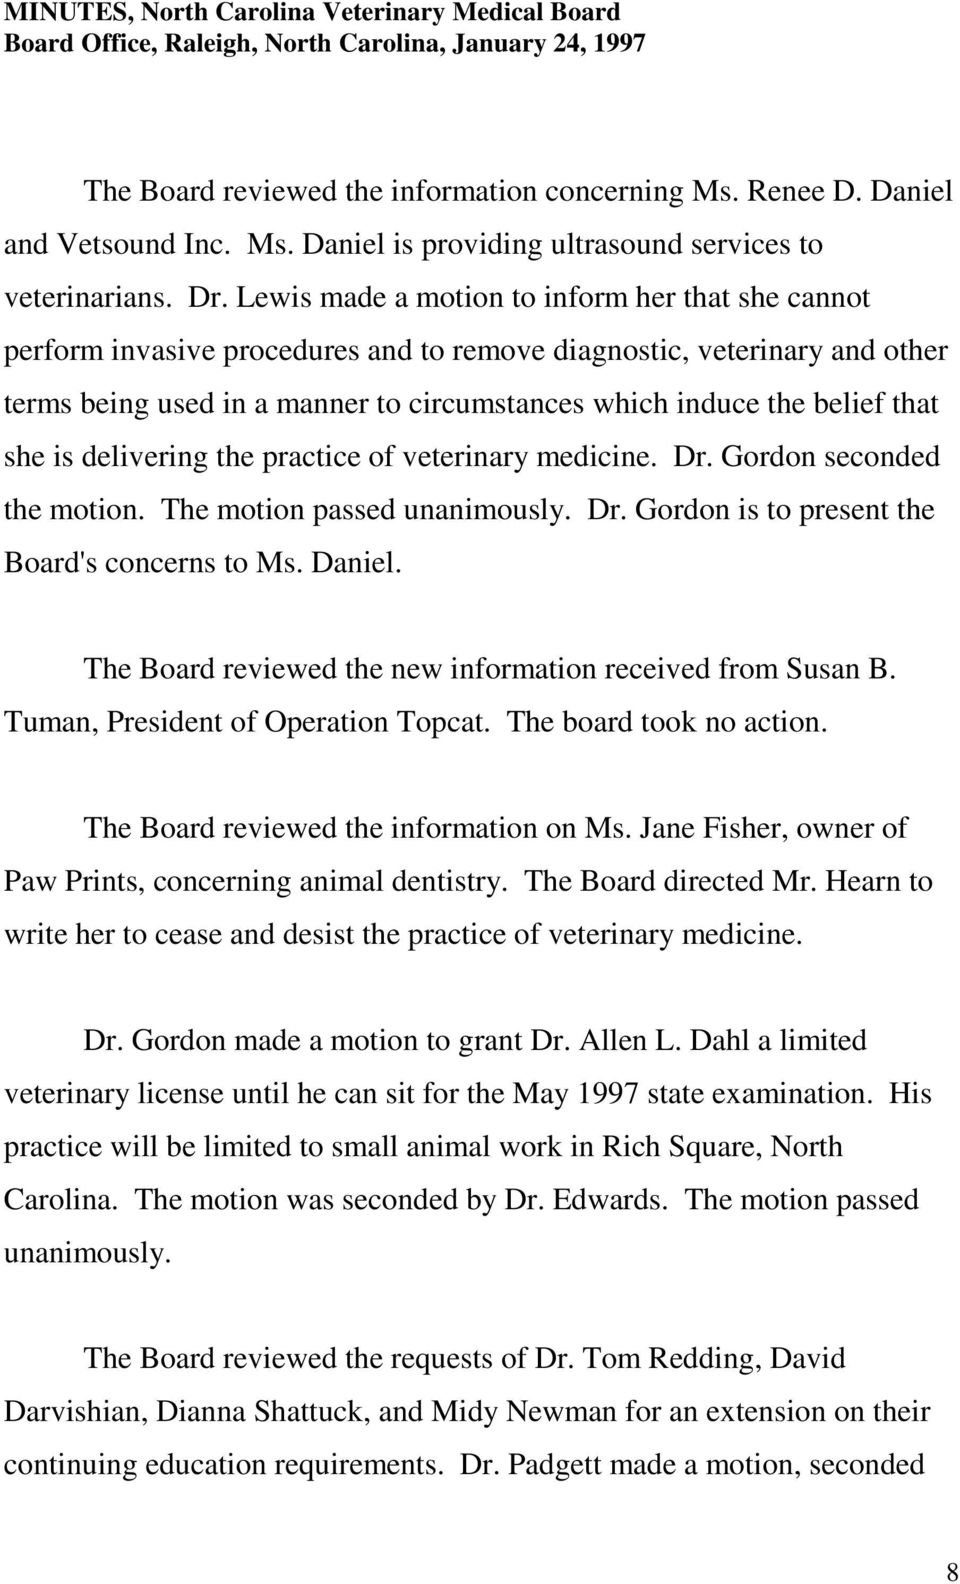 she is delivering the practice of veterinary medicine. Dr. Gordon seconded the motion. The motion passed unanimously. Dr. Gordon is to present the Board's concerns to Ms. Daniel.